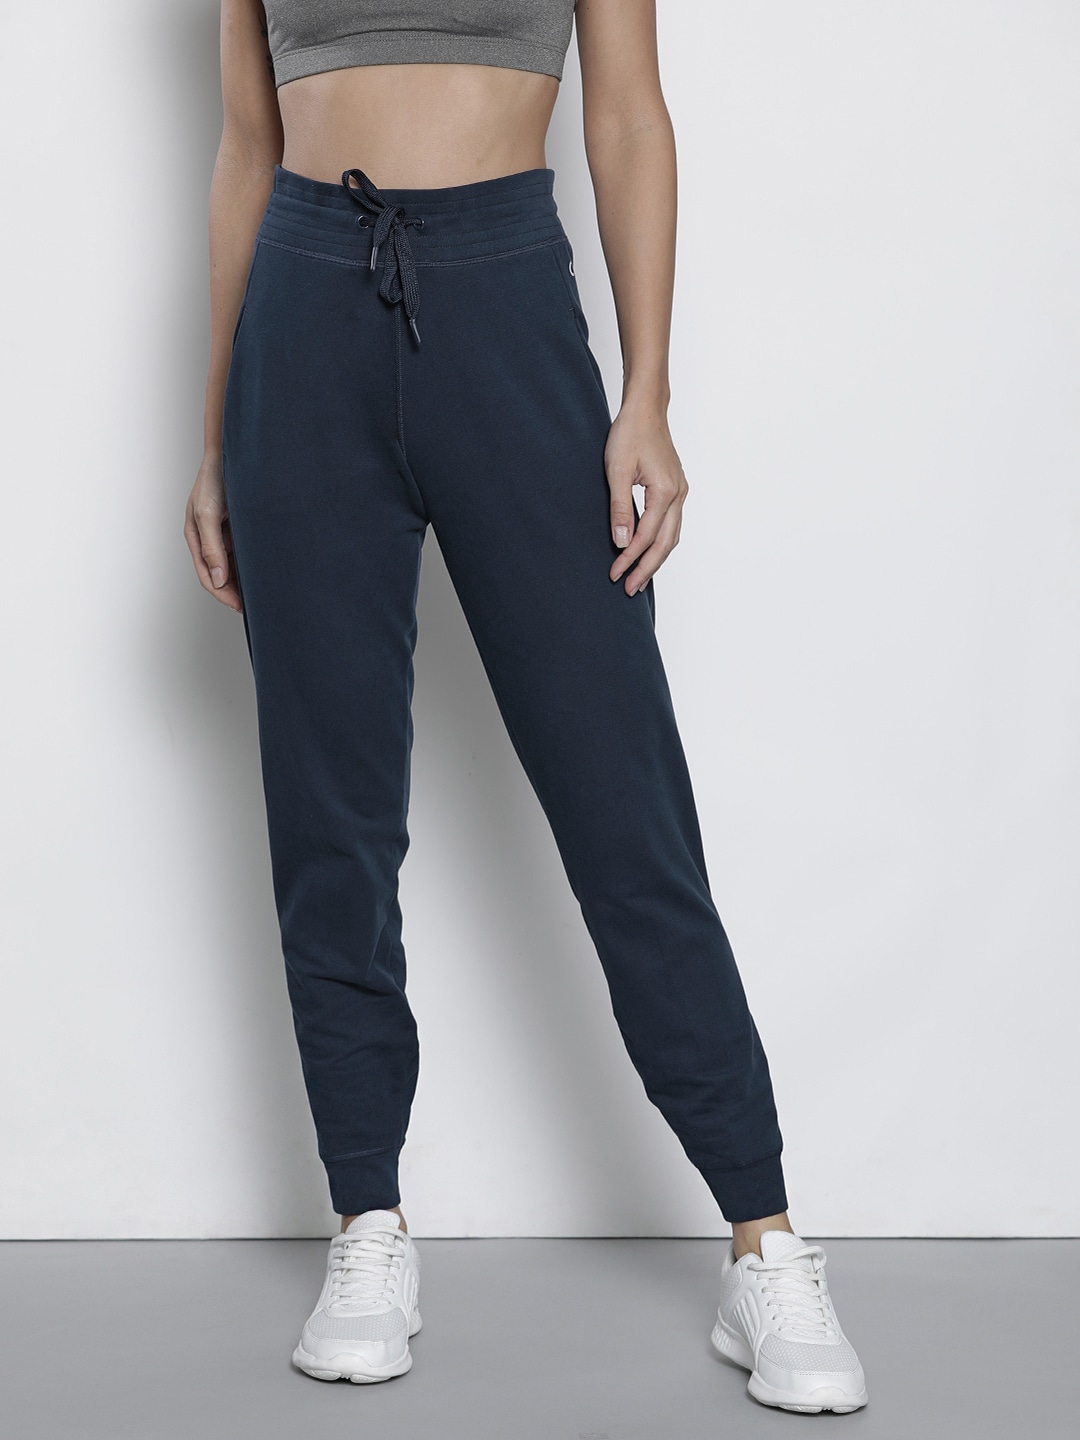 Marks & Spencer Women Navy Blue Solid Joggers Price in India